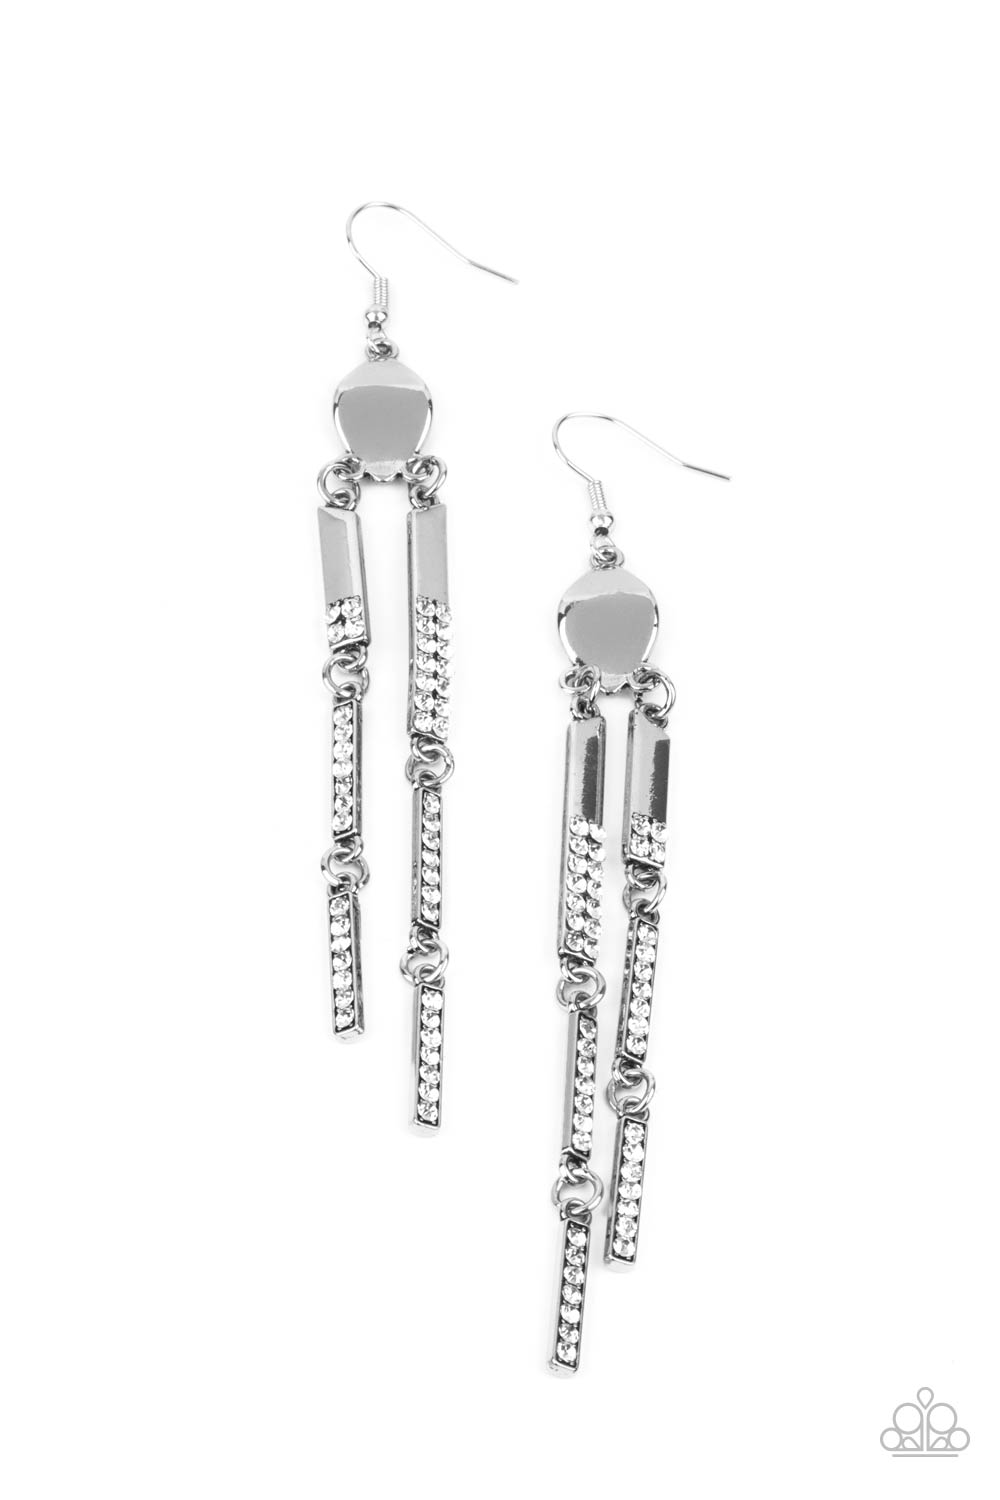 Defined Dazzle White Paparazzi Earring Cashmere Pink Jewels